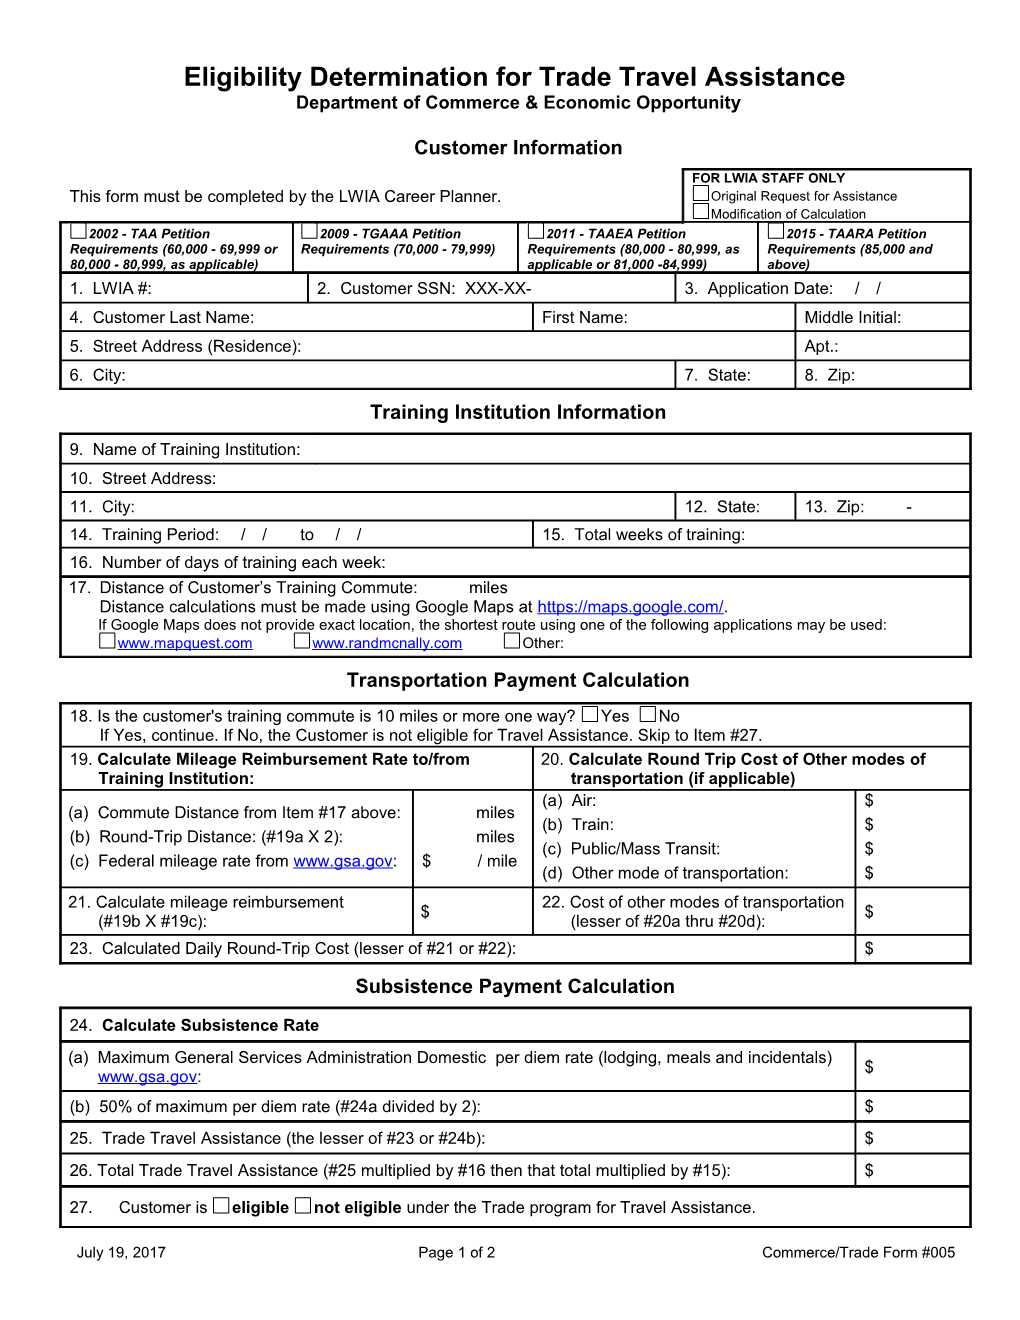 Form #005 Eligibility Determination for Trade Travel Assistance (MS Word) 3-01-14